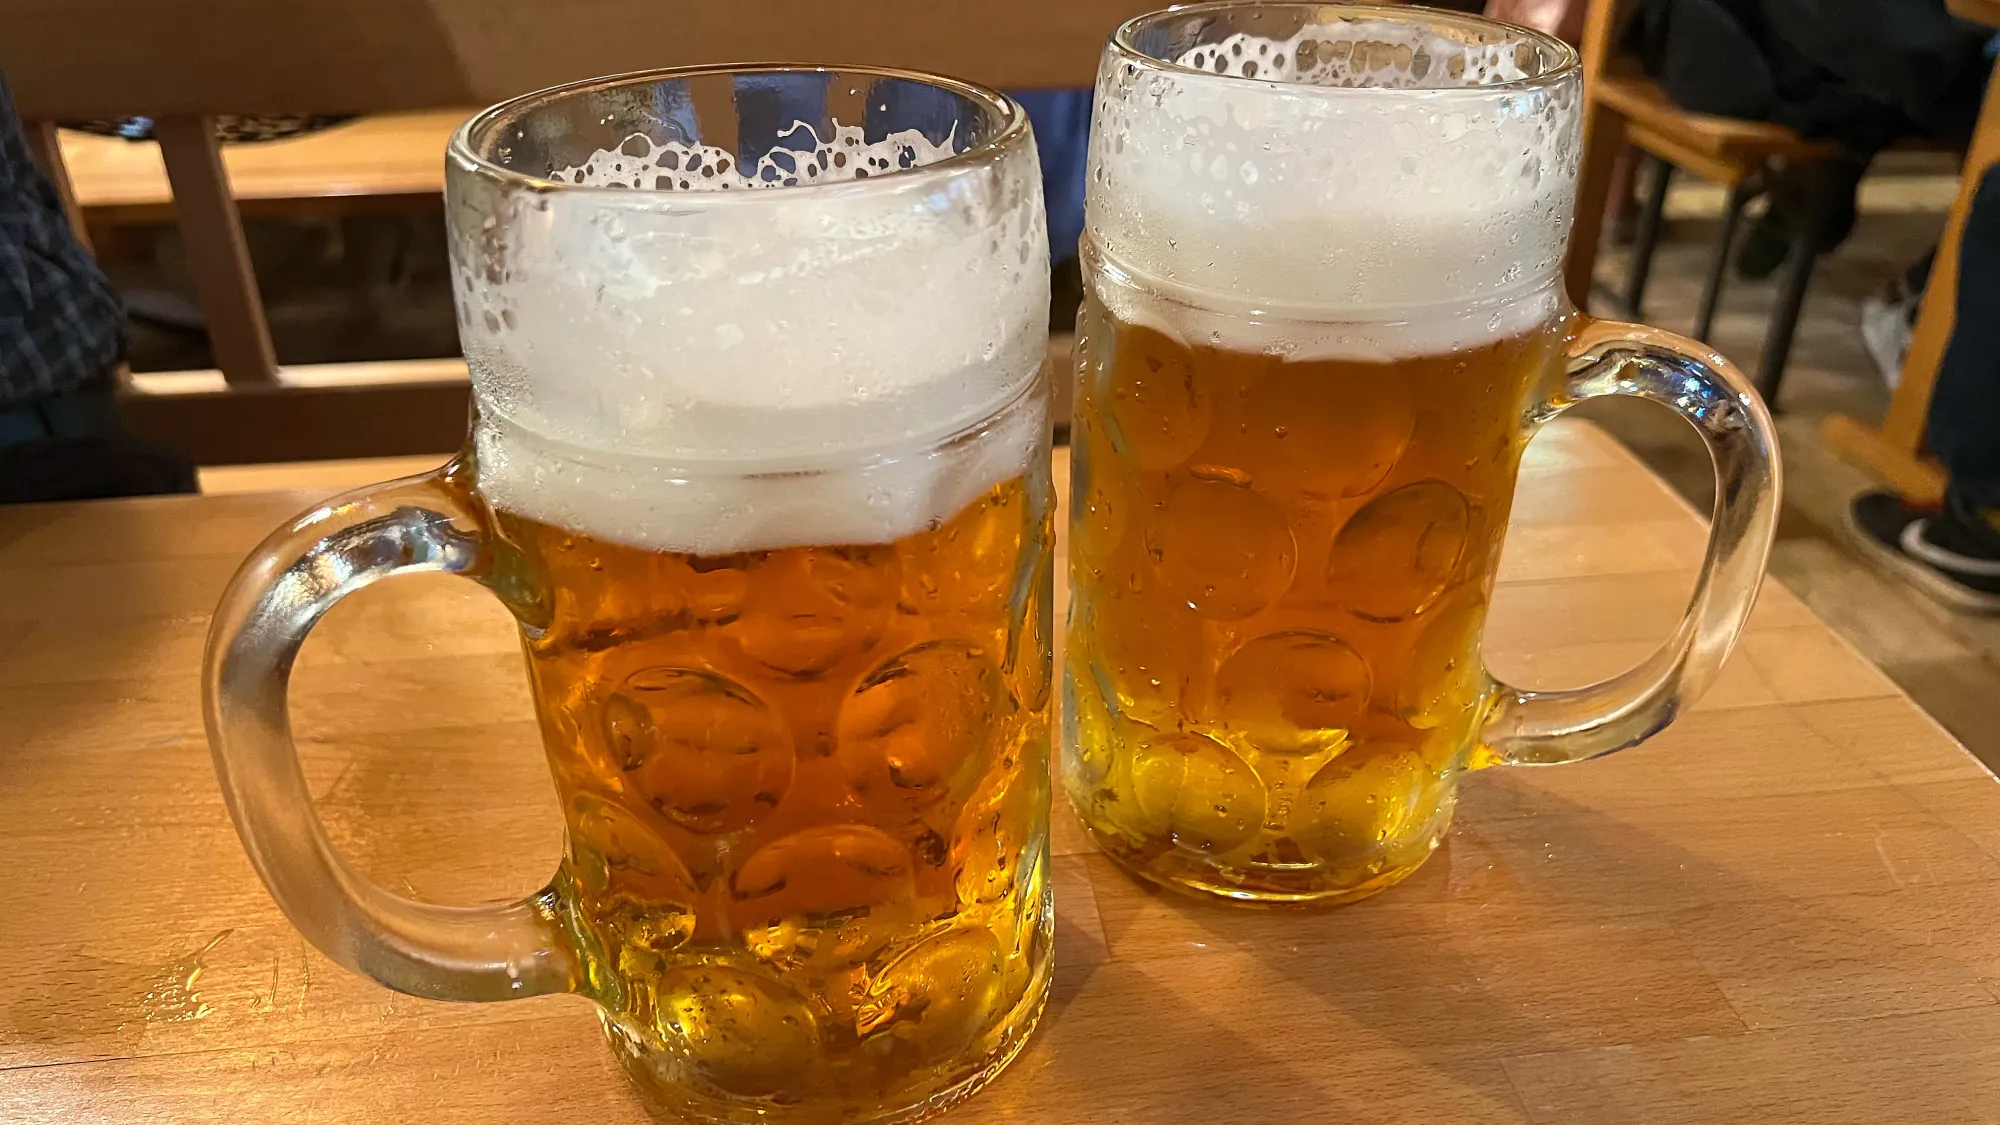 Two colorless glasses filled with foamy beer